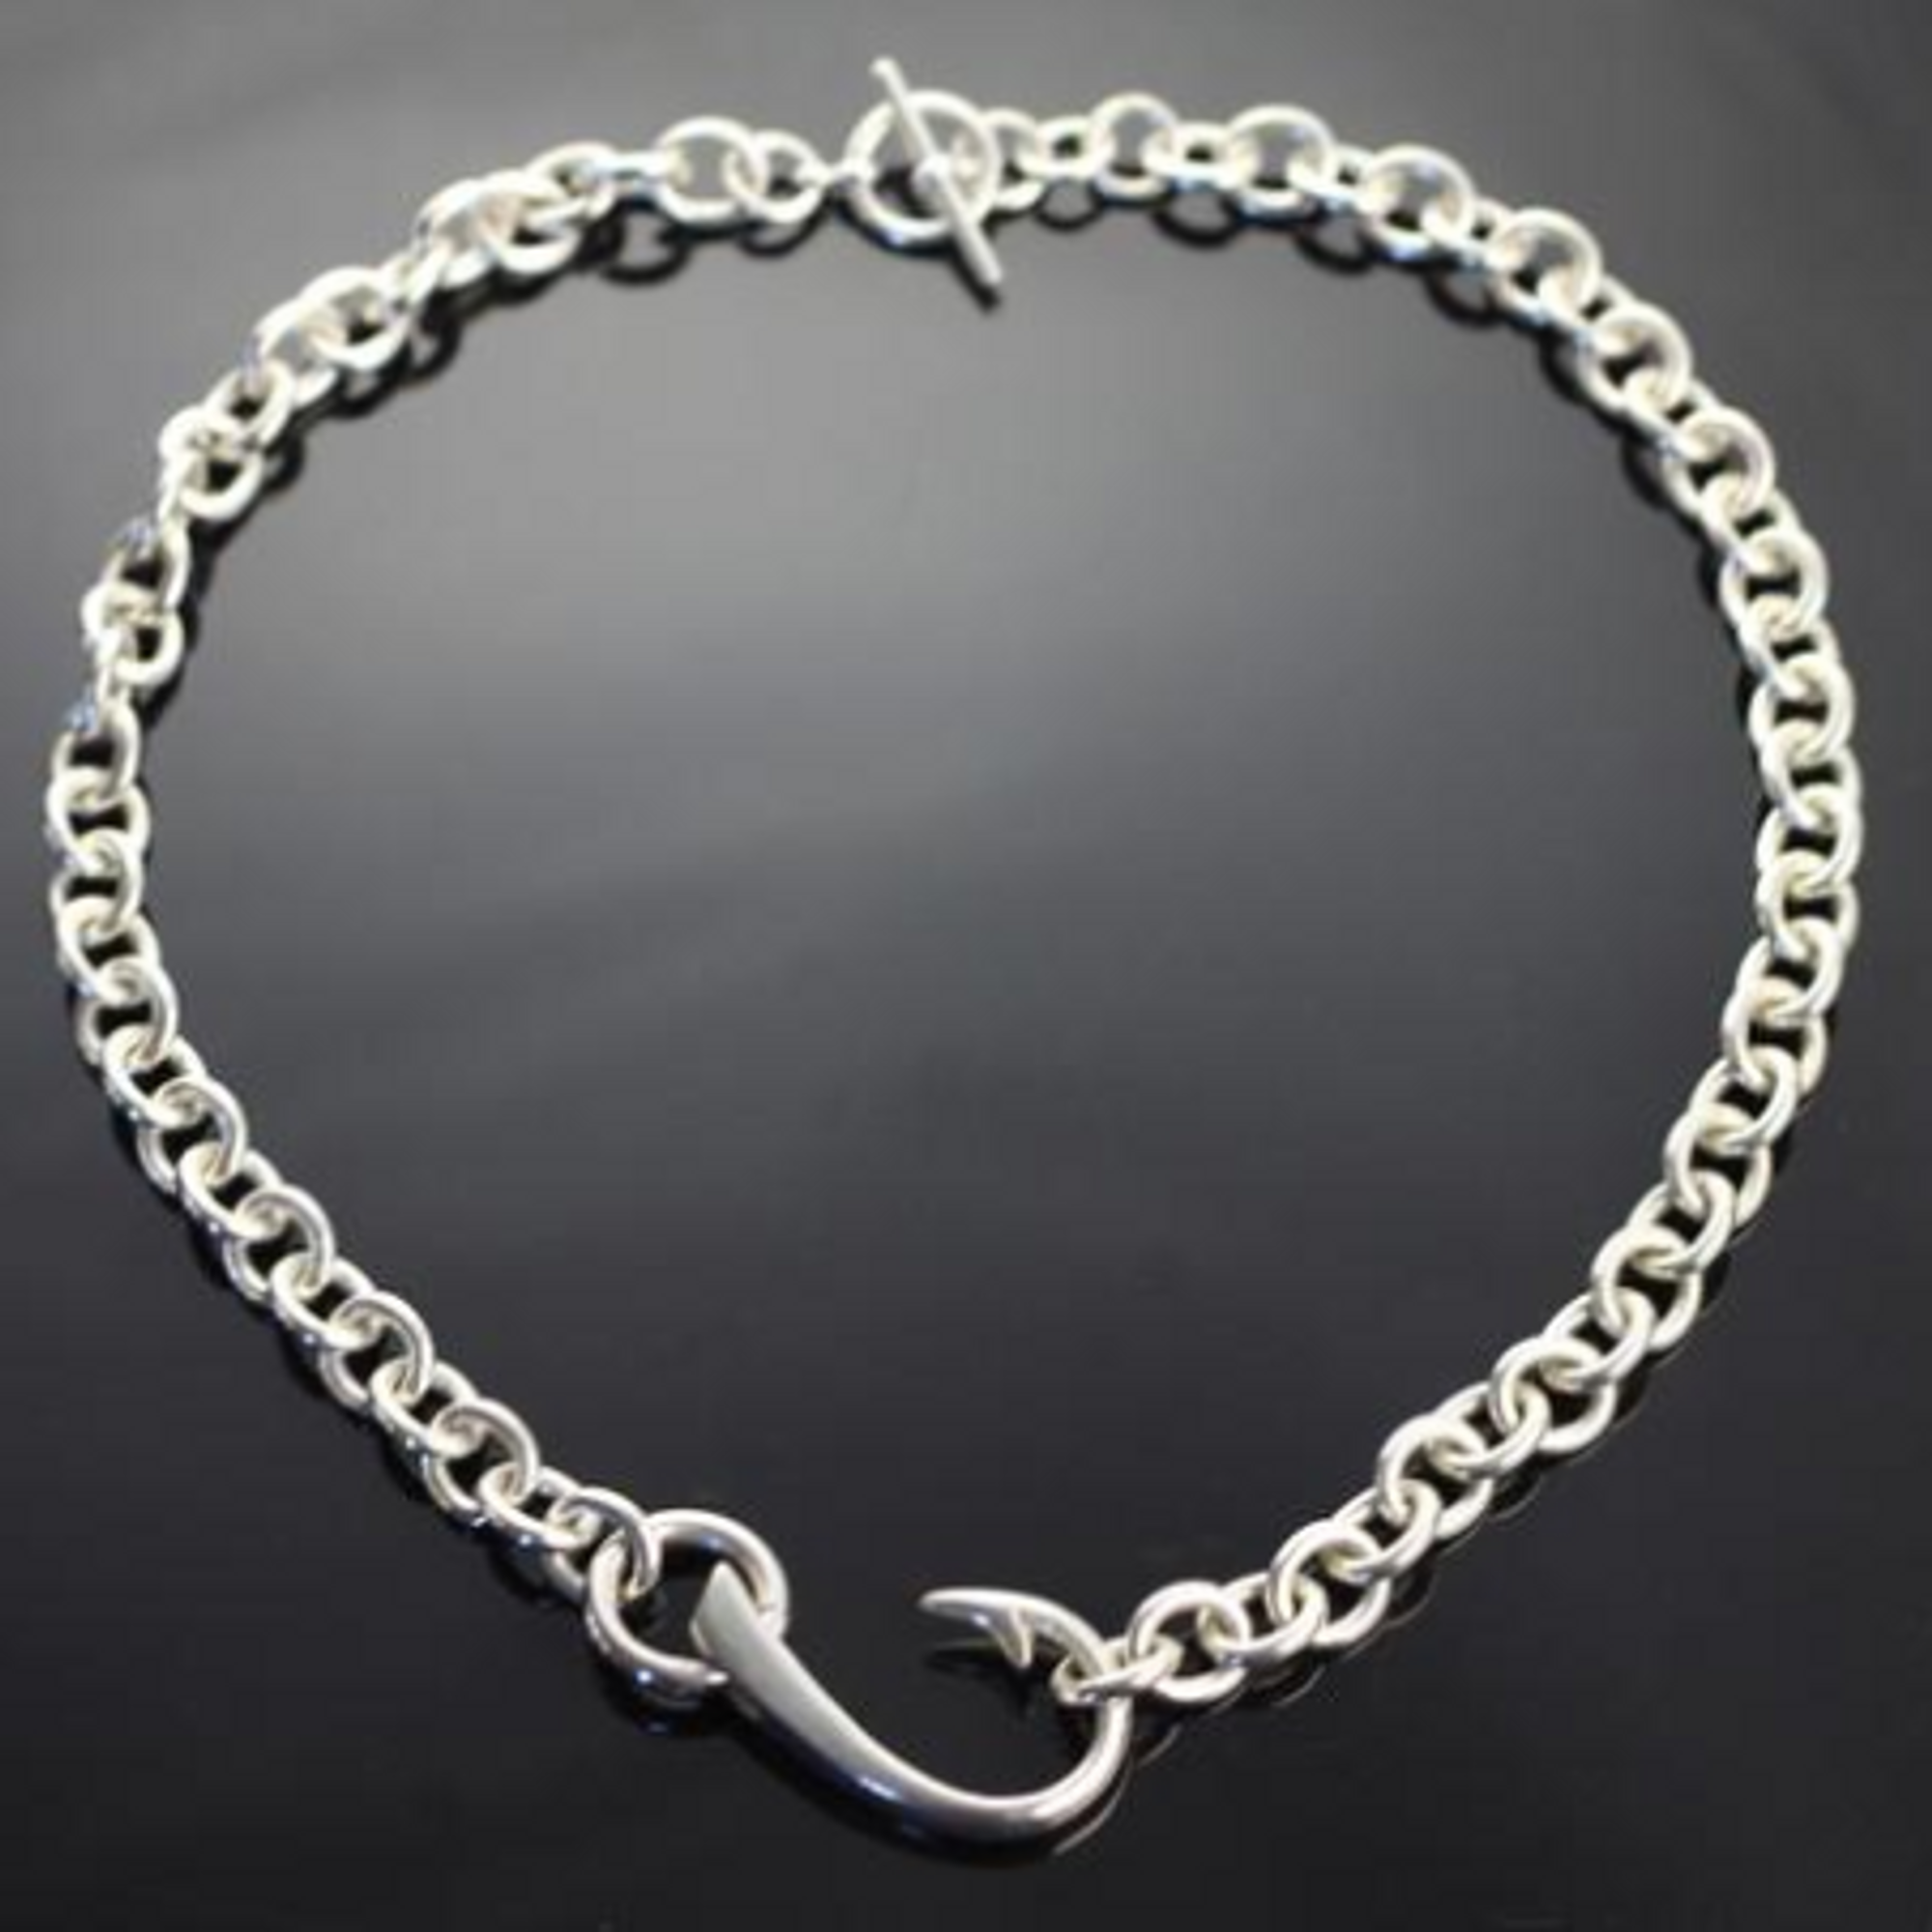 Hook Sterling Silver Pendant On Heavy Link Chain Necklace | Nature Jewelry